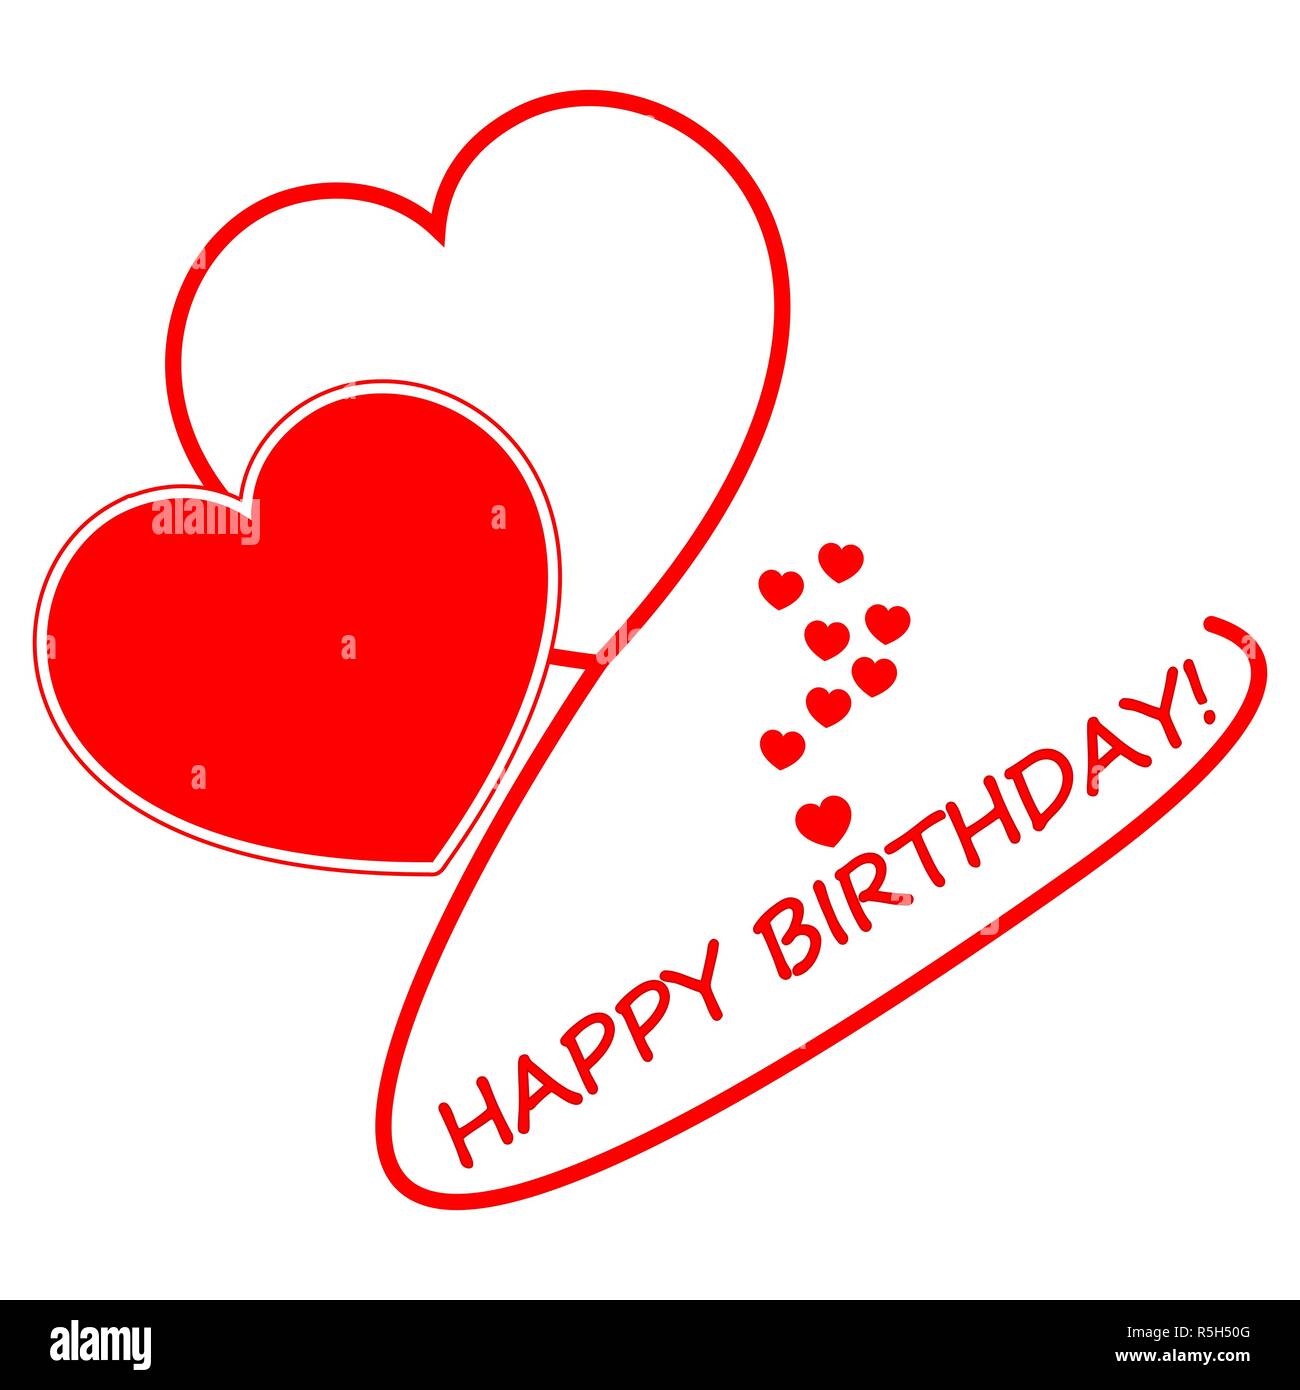 Happy Birthday Card With Red Hearts Illustration Stock Photo